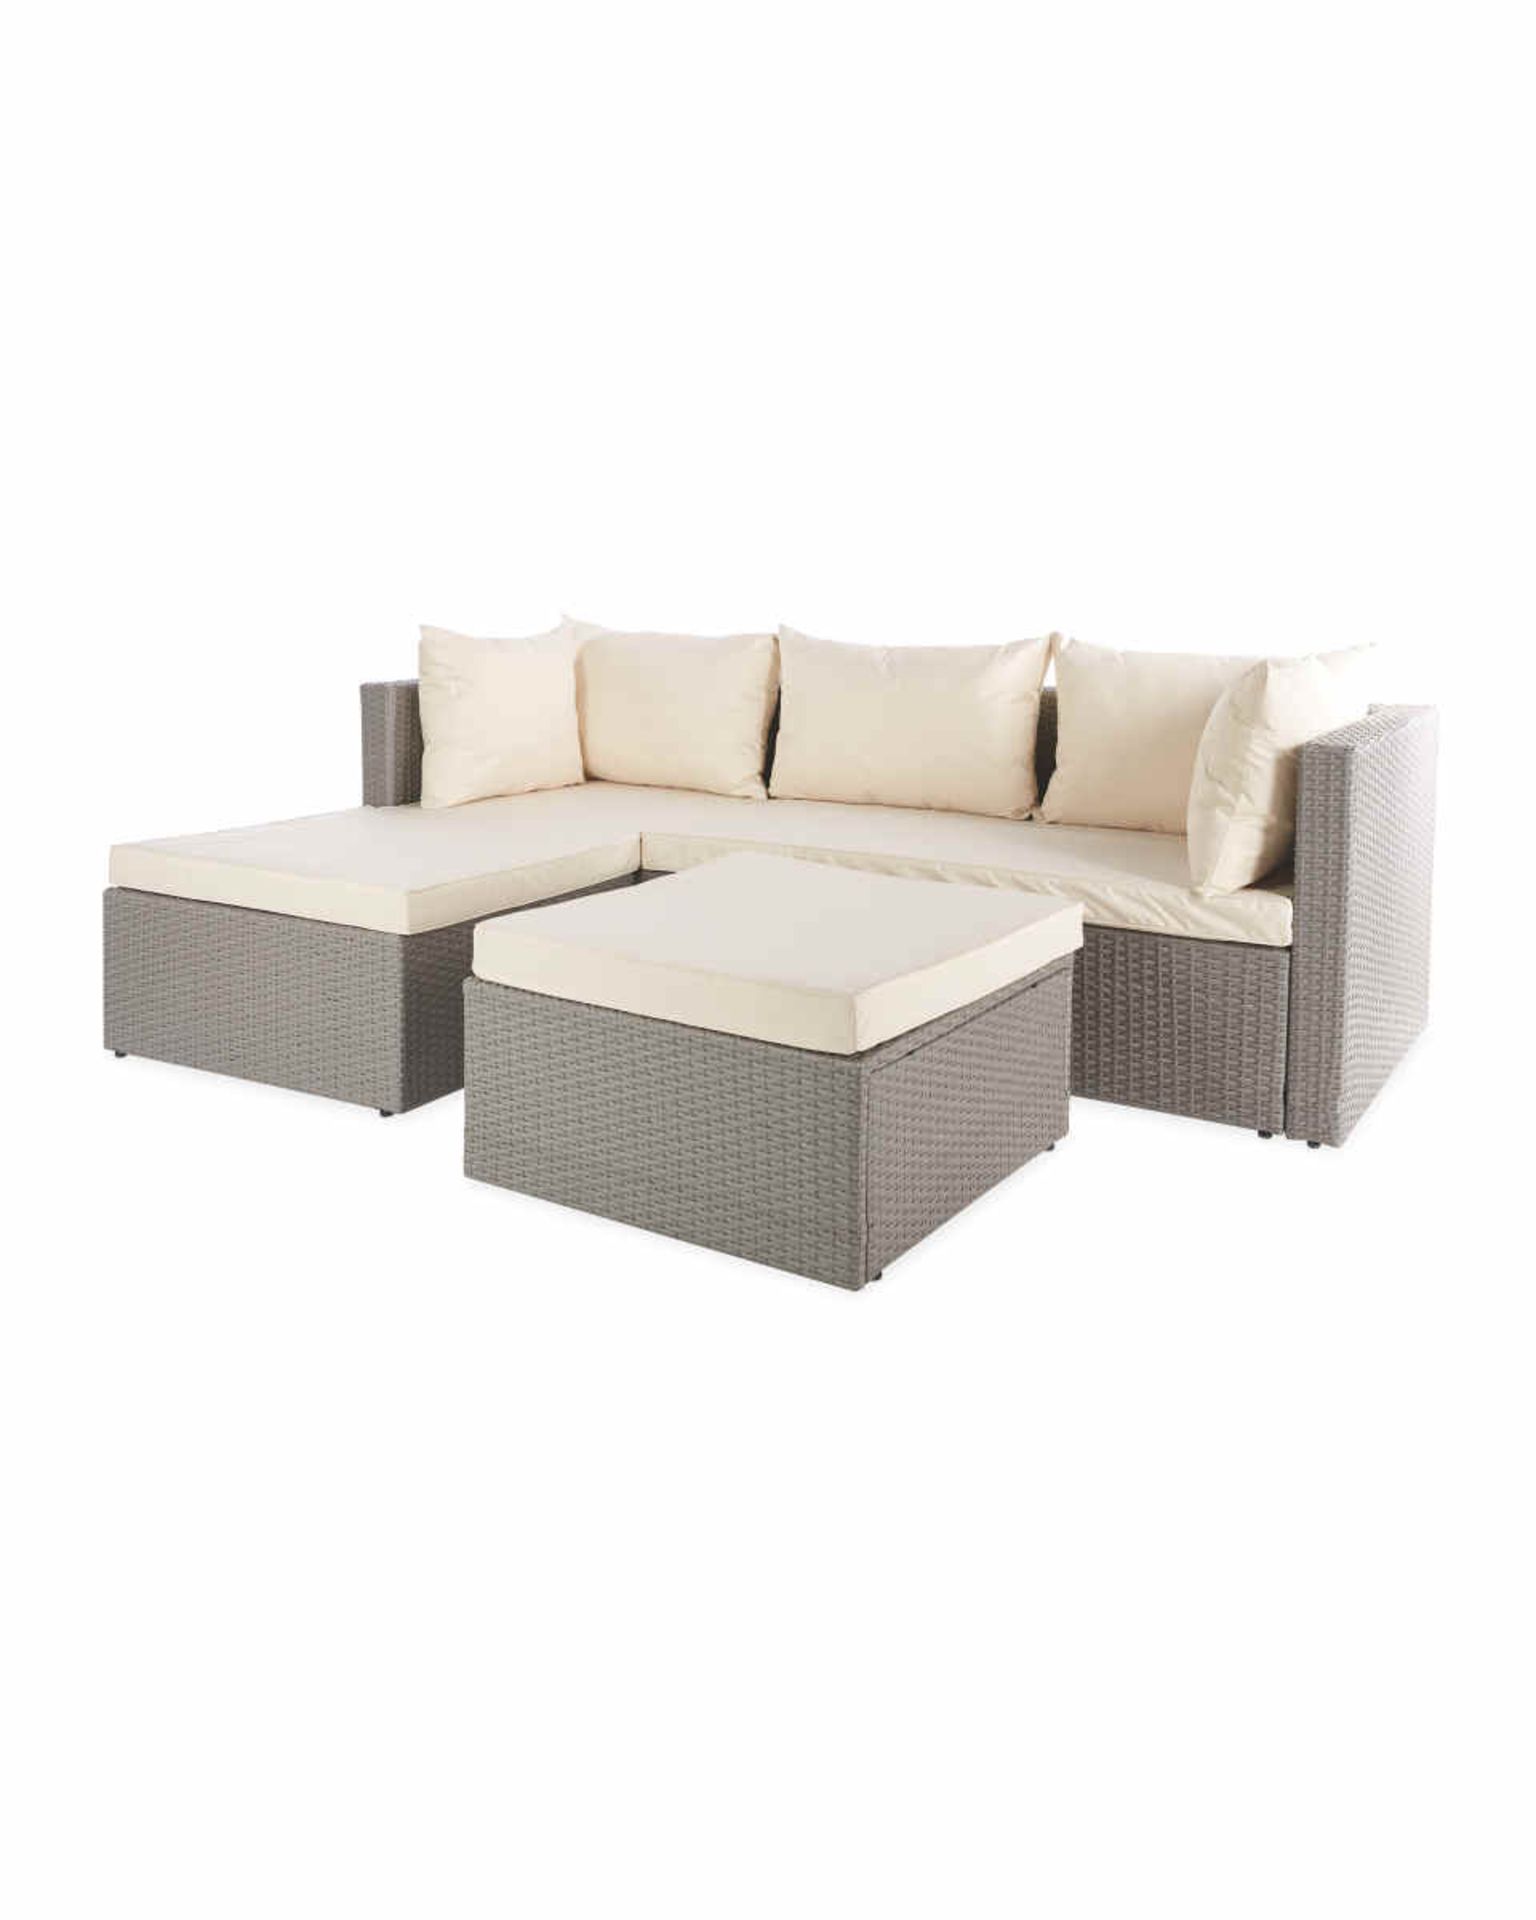 Cream Rattan Corner Sofa & Cover. - ROW16. Soak in the sun and feel that summer breeze while sitting - Image 2 of 3